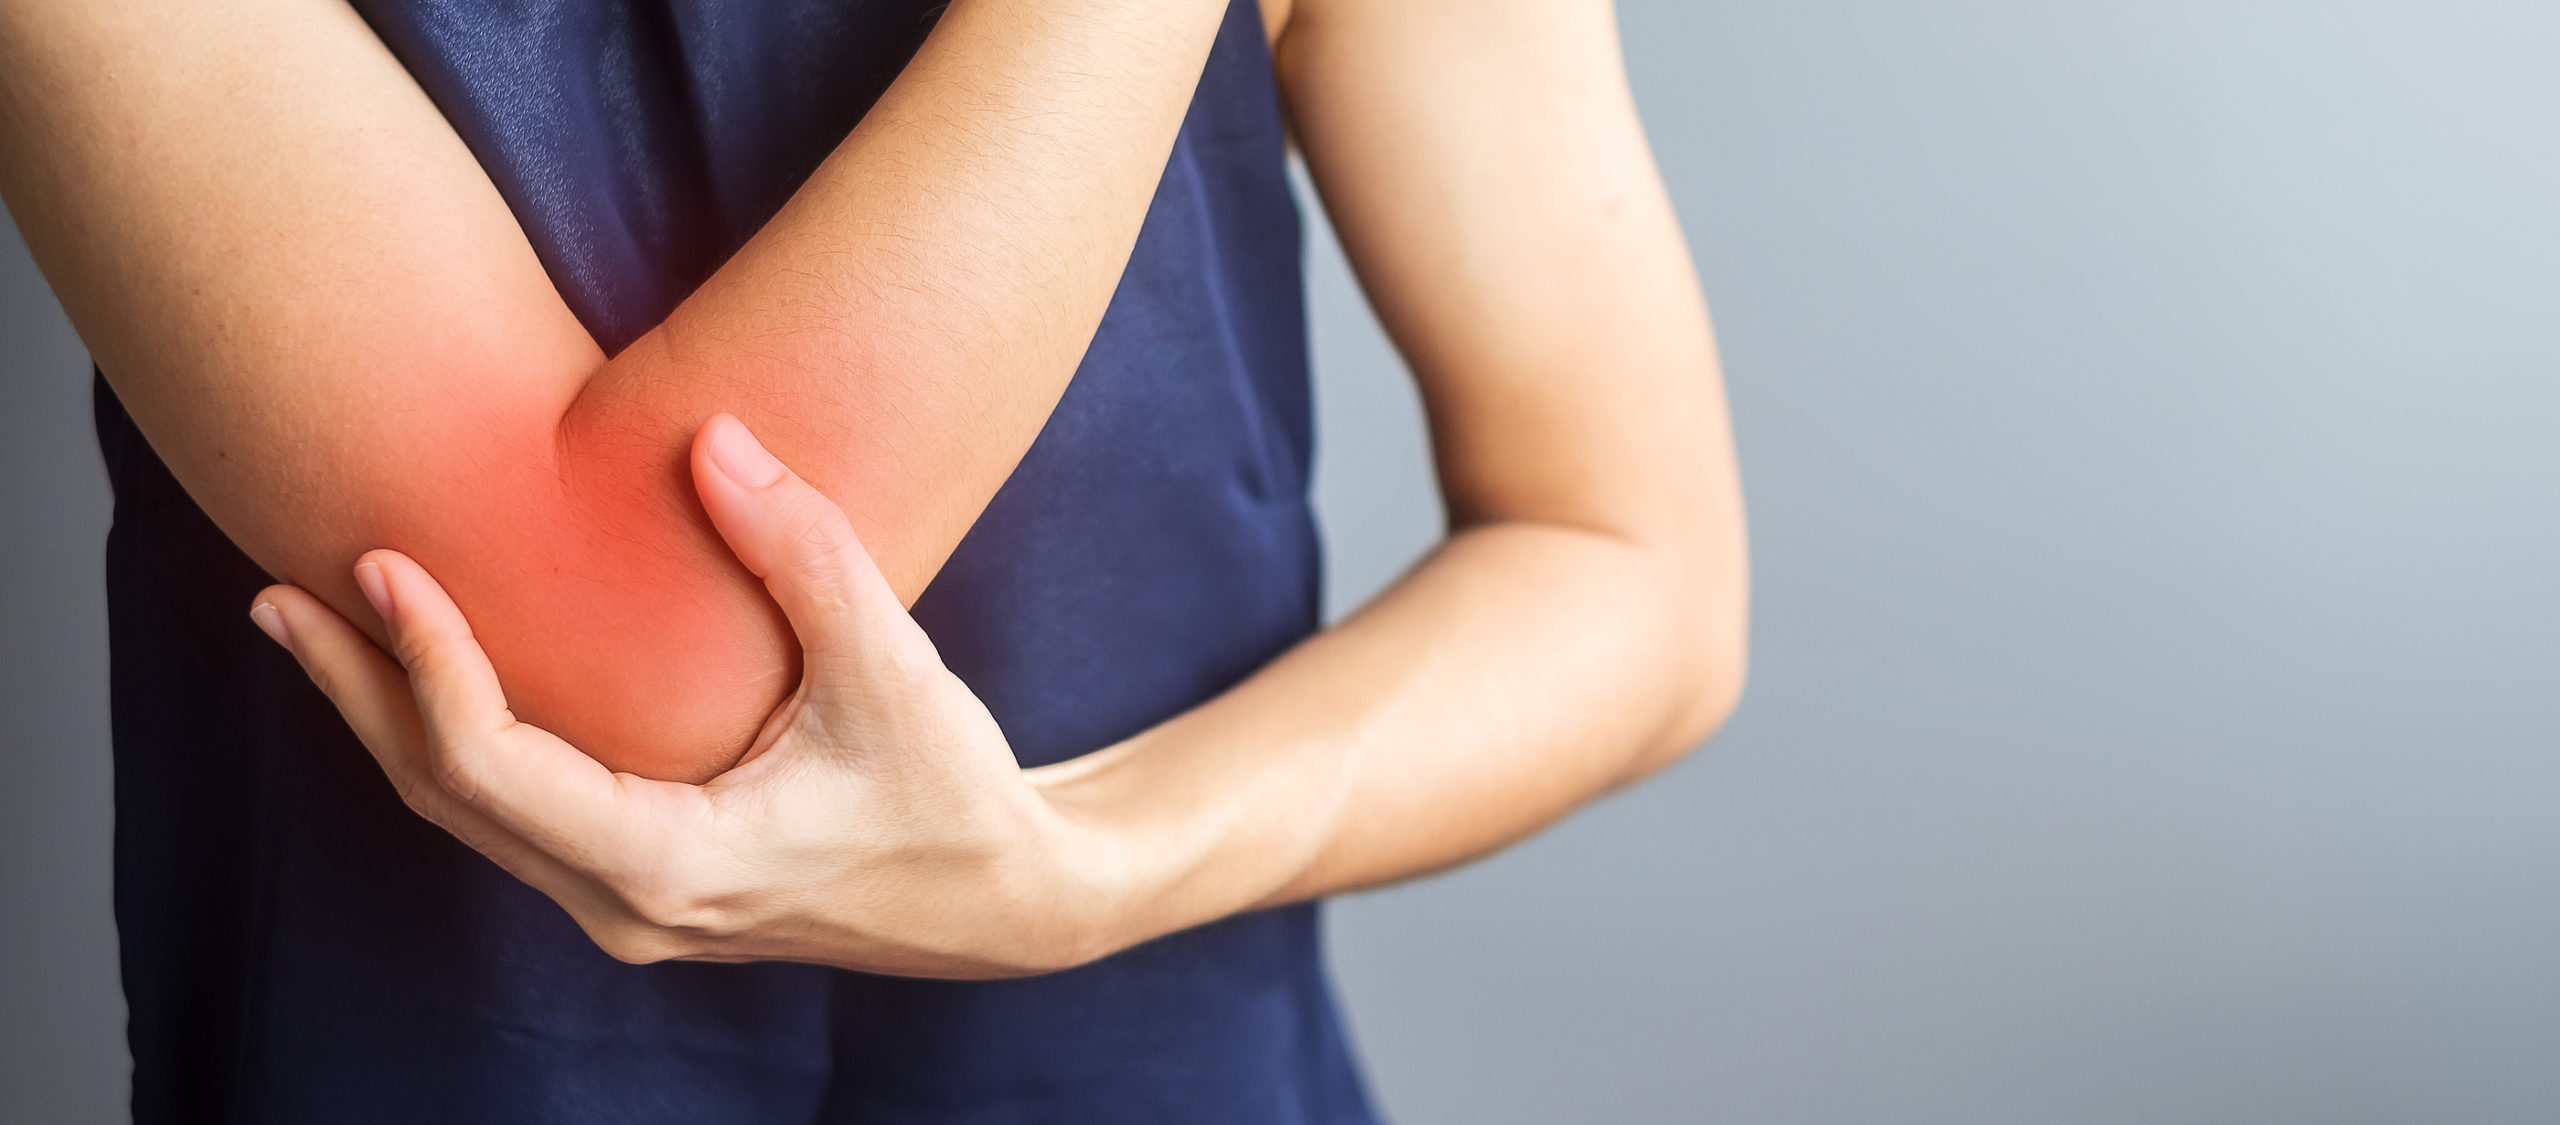 Elbow Injuries Caused by Car Accidents